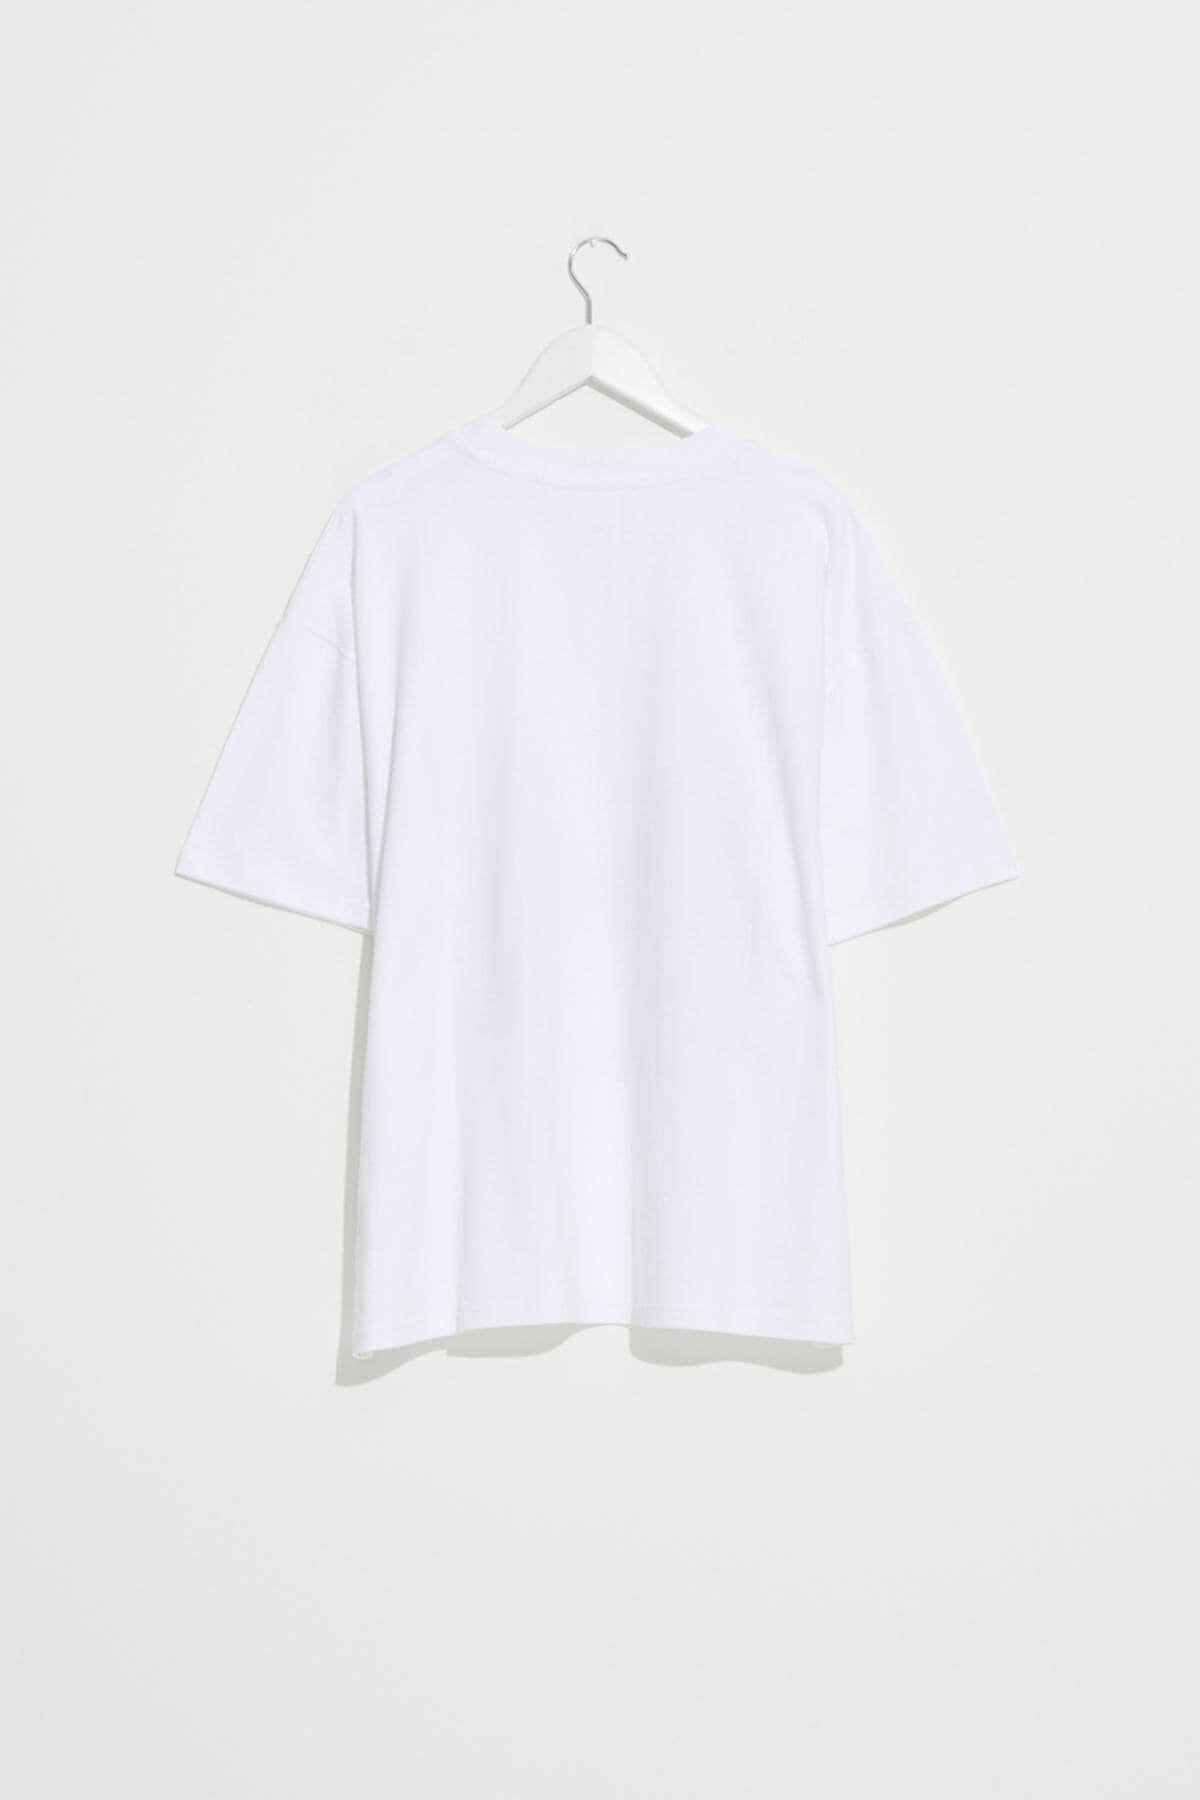 Misfit Shapes - Dream Less OS Tee - White